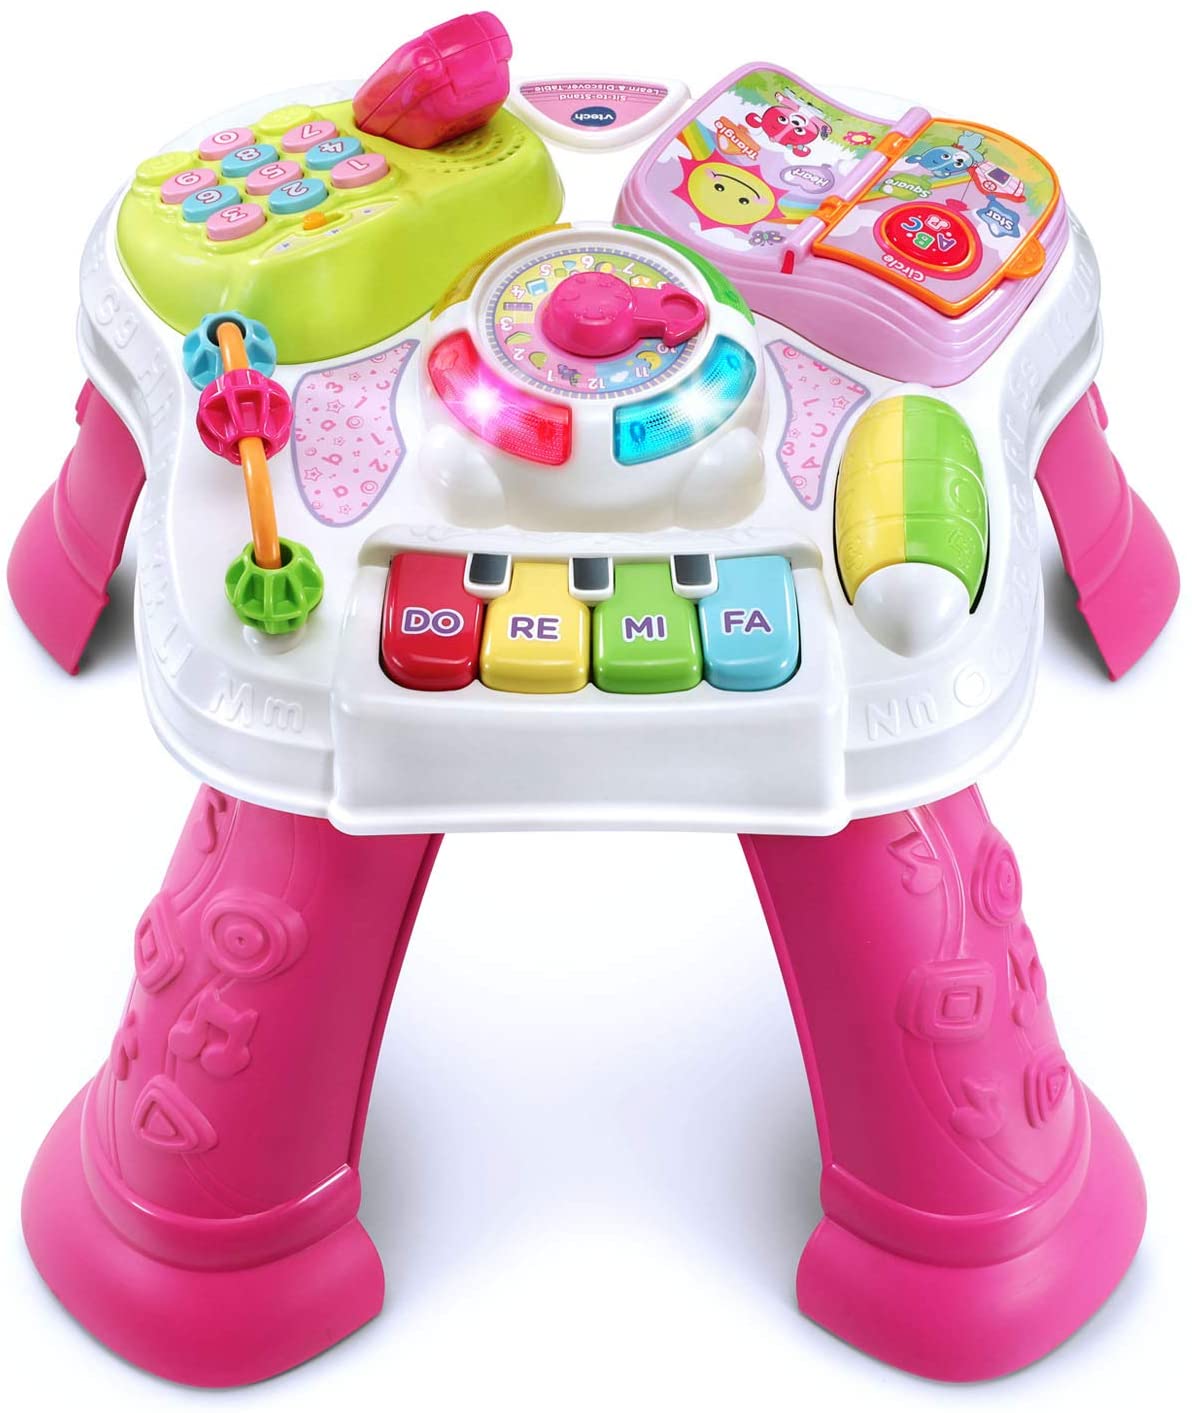 VTech Interactive Sound Table Sit-To-Stand Toy